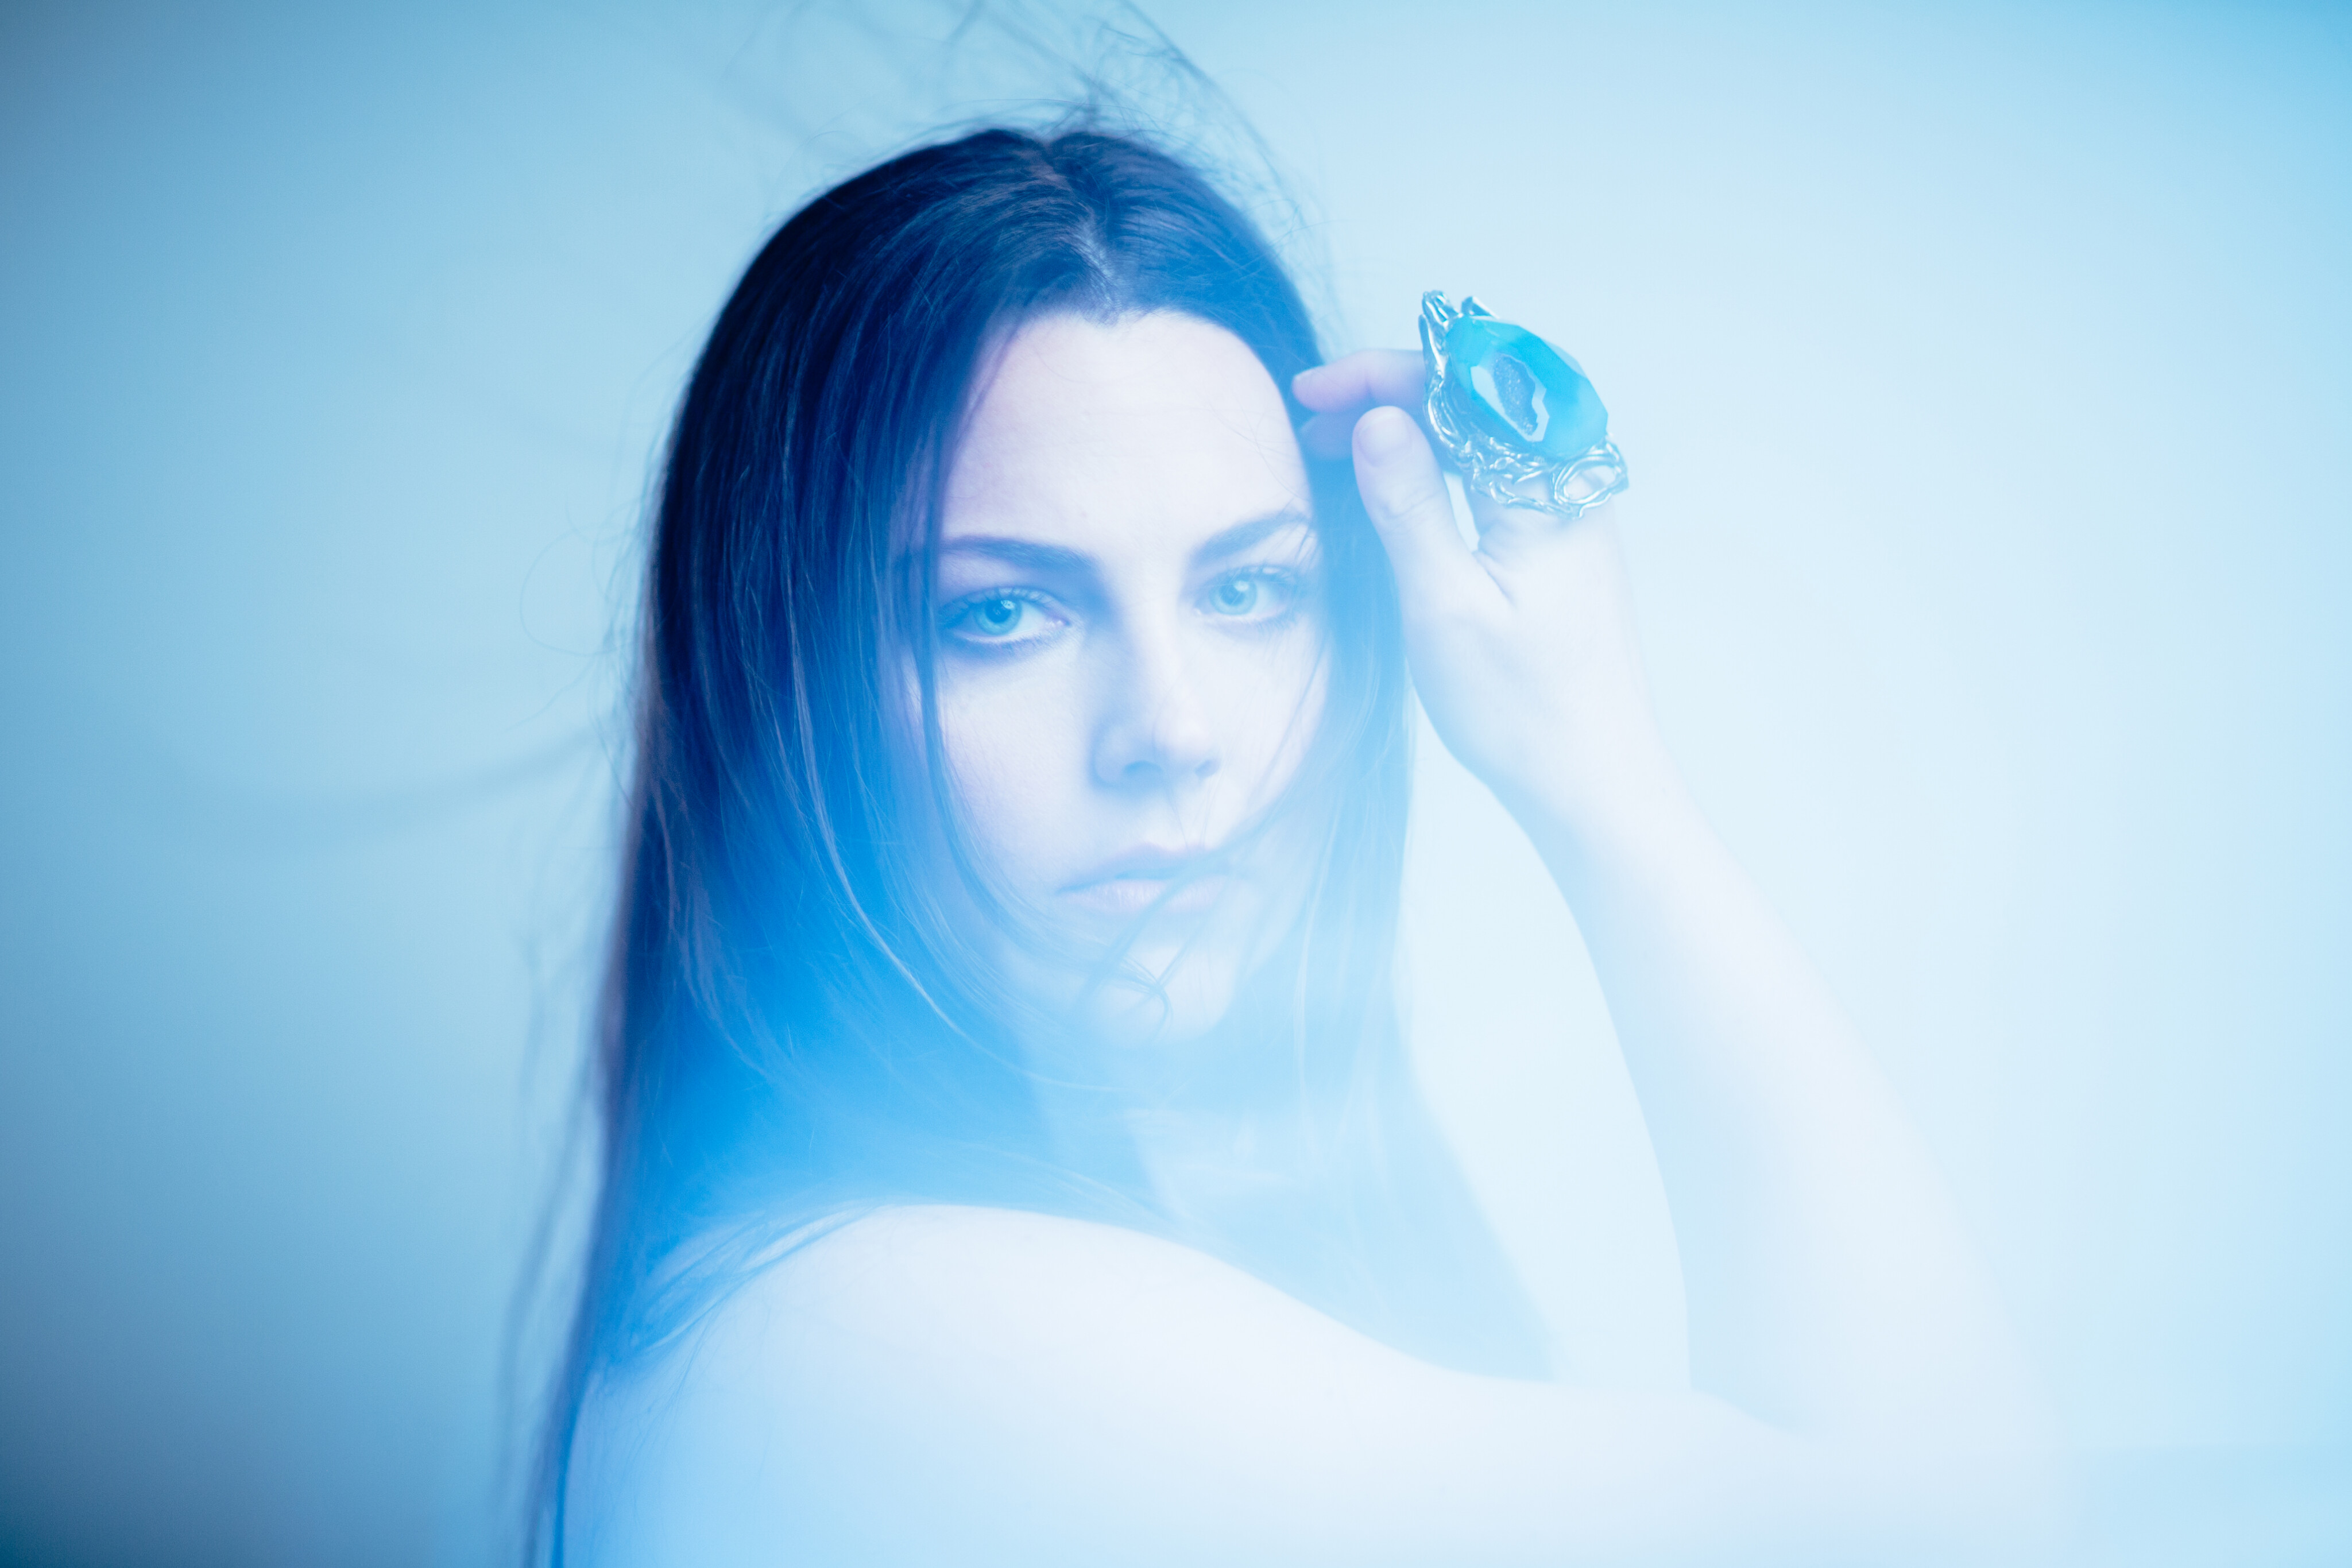 4096x2731
Keywords: amy lee;recover;photoshoot;covers;2016;blue